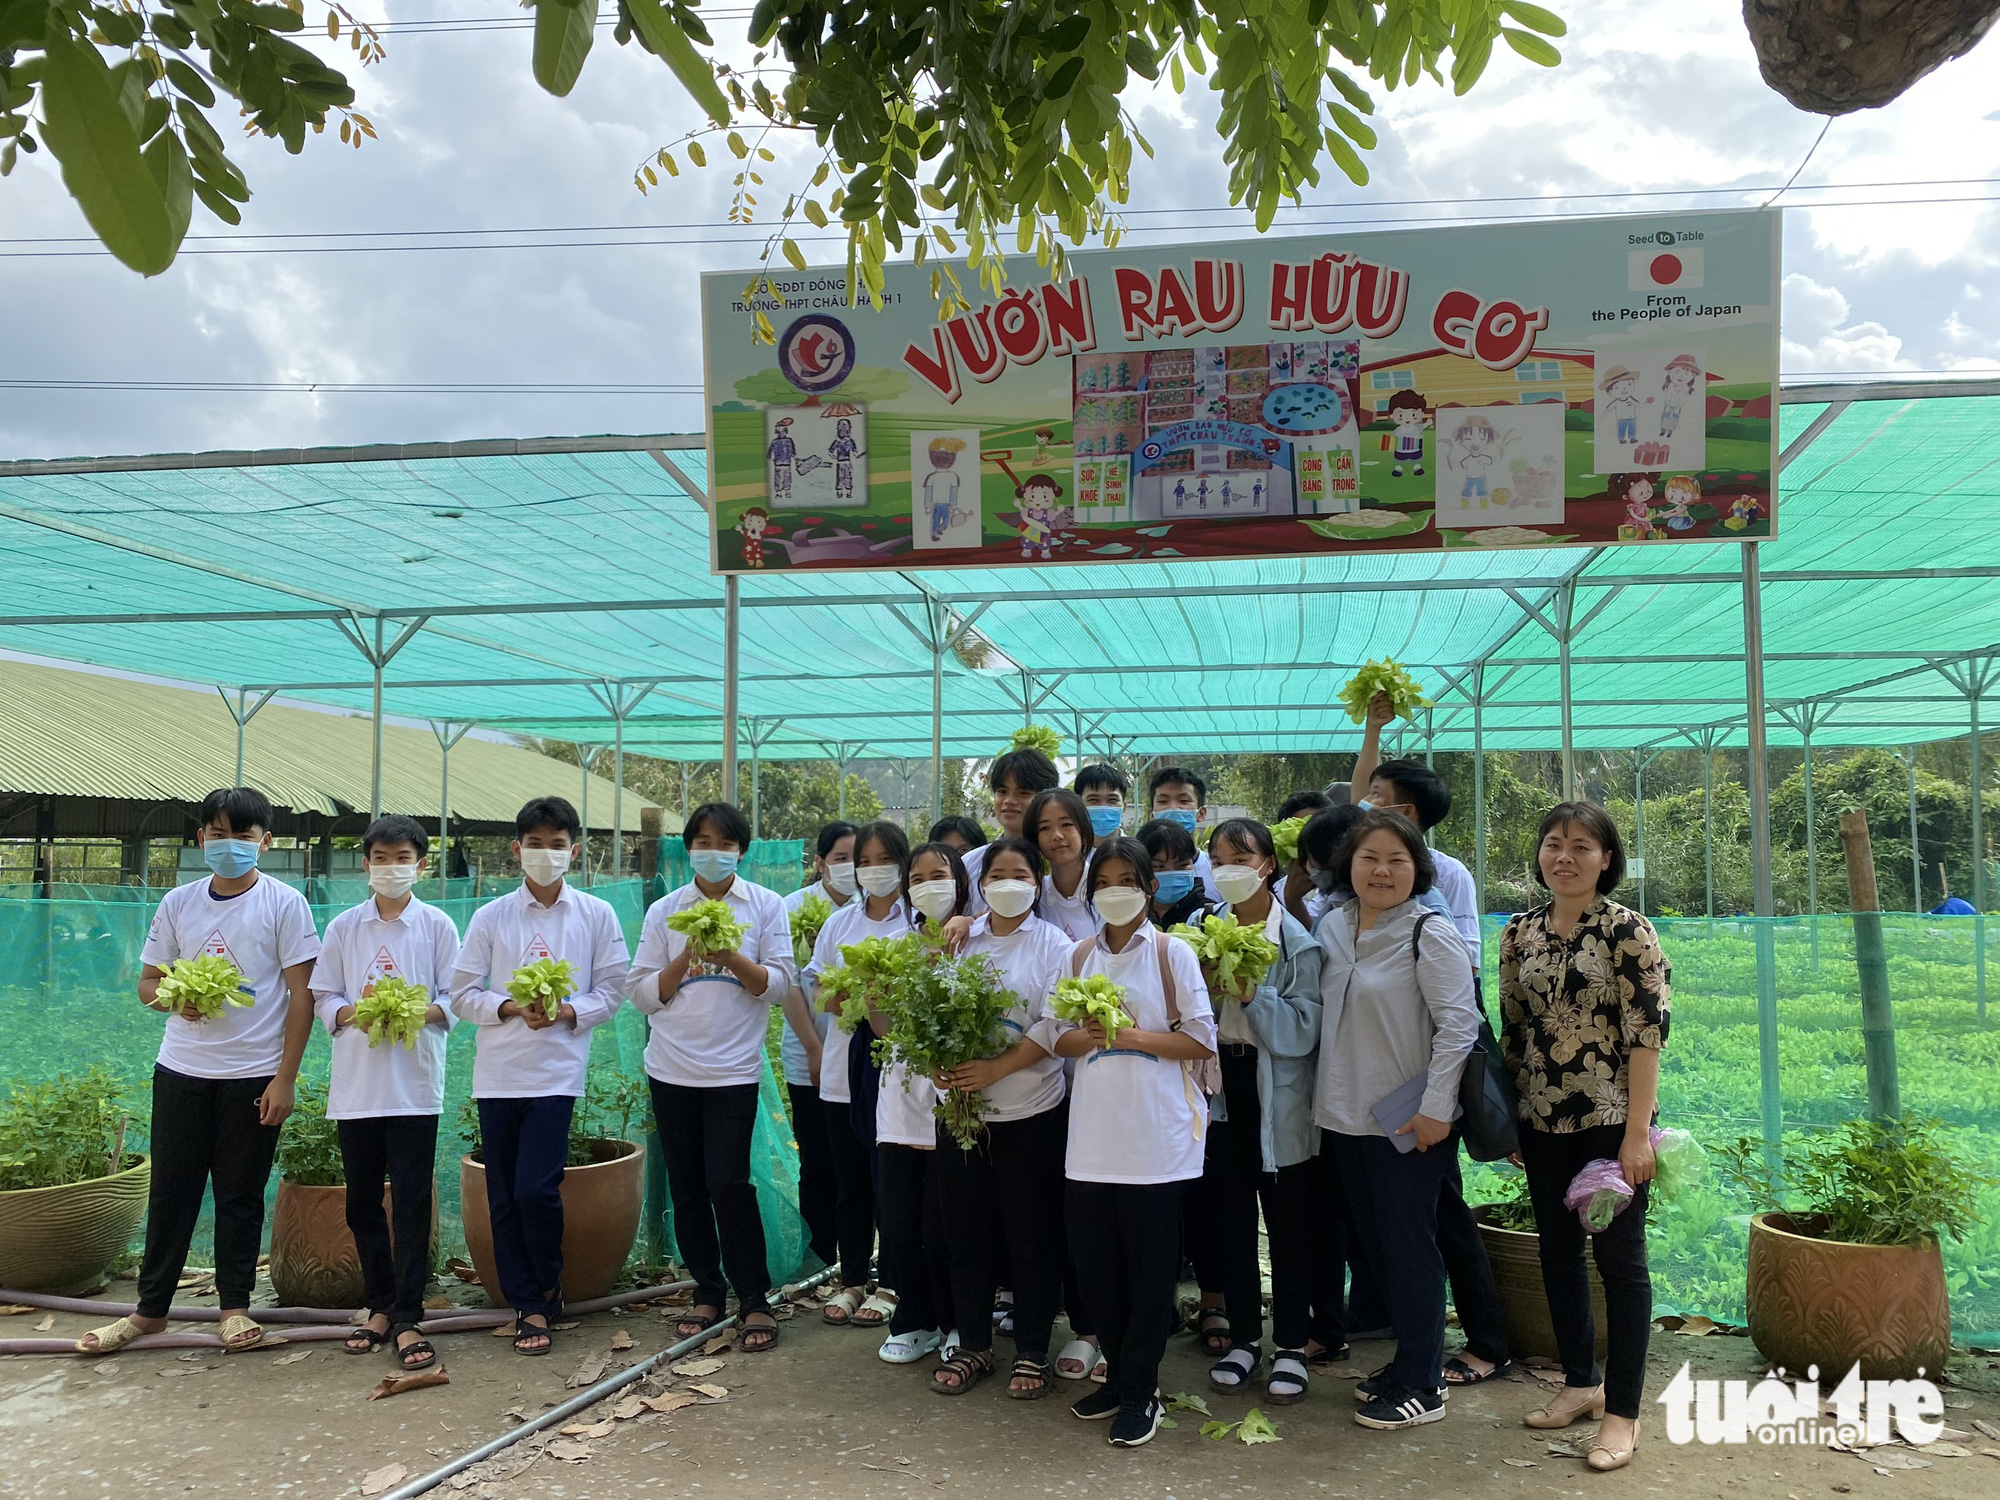 Students and teachers pose for a group photo in front of a school vegetable garden